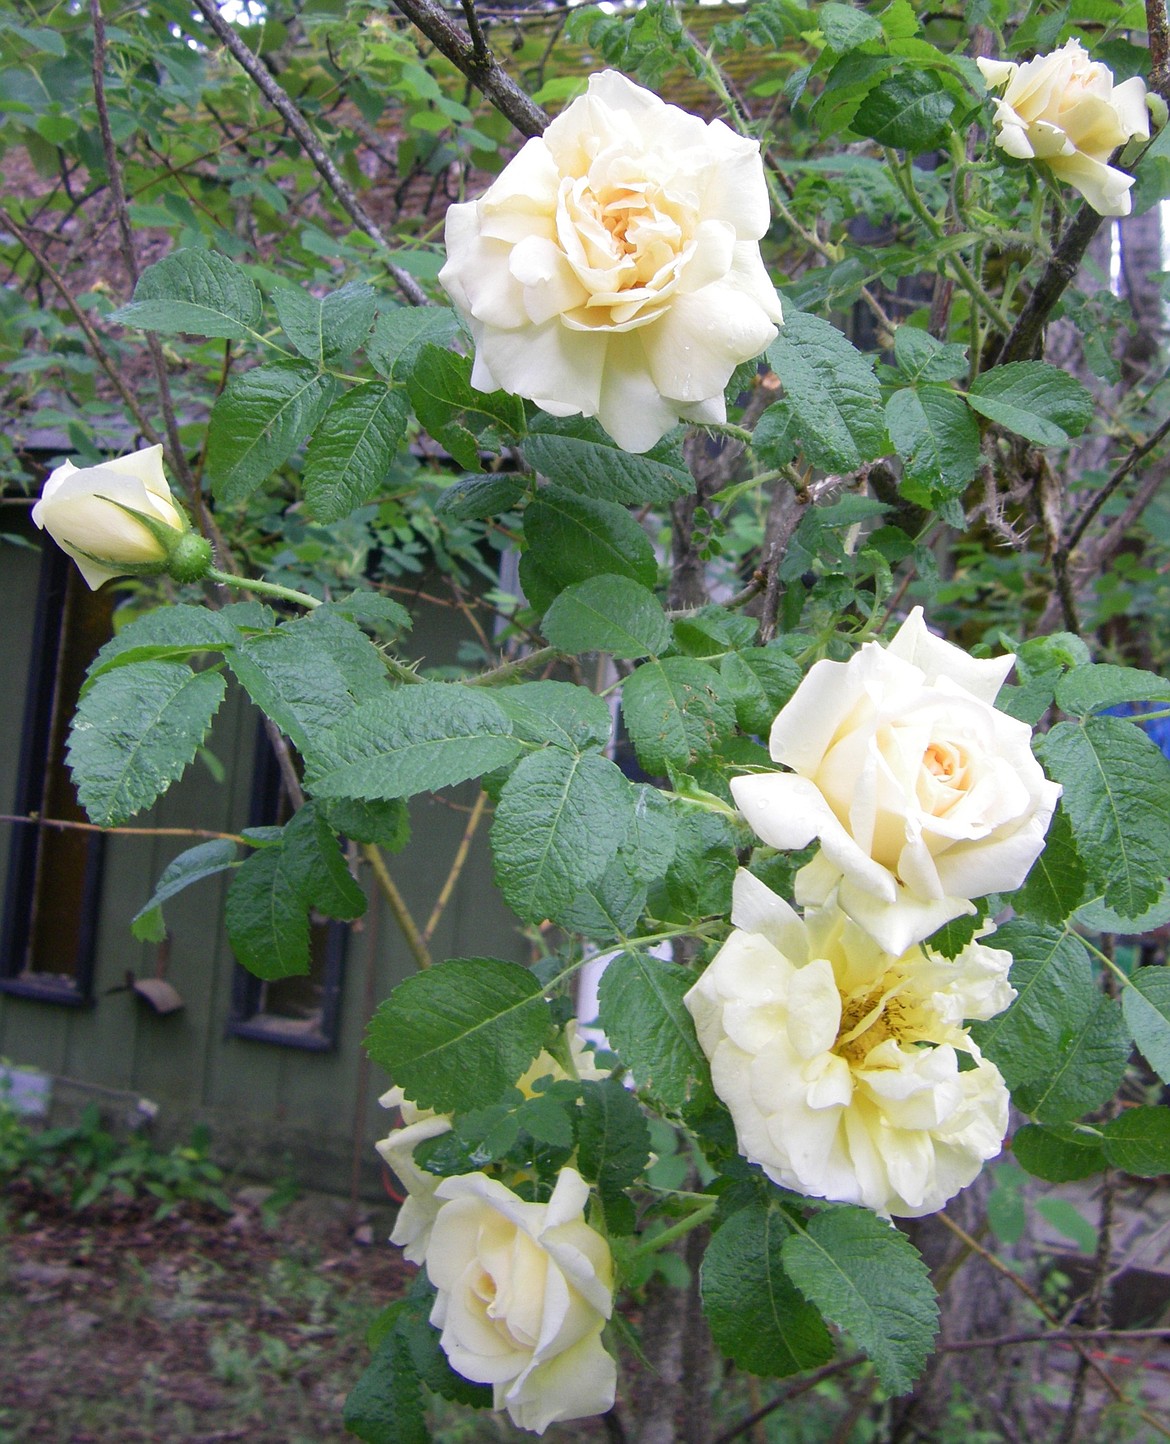 Harrison’s (aka Harbison’s) rose is the old-fashioned yellow native that blooms in Sandpoint’s landscapes and gardens every Spring. (Courtesy photo)